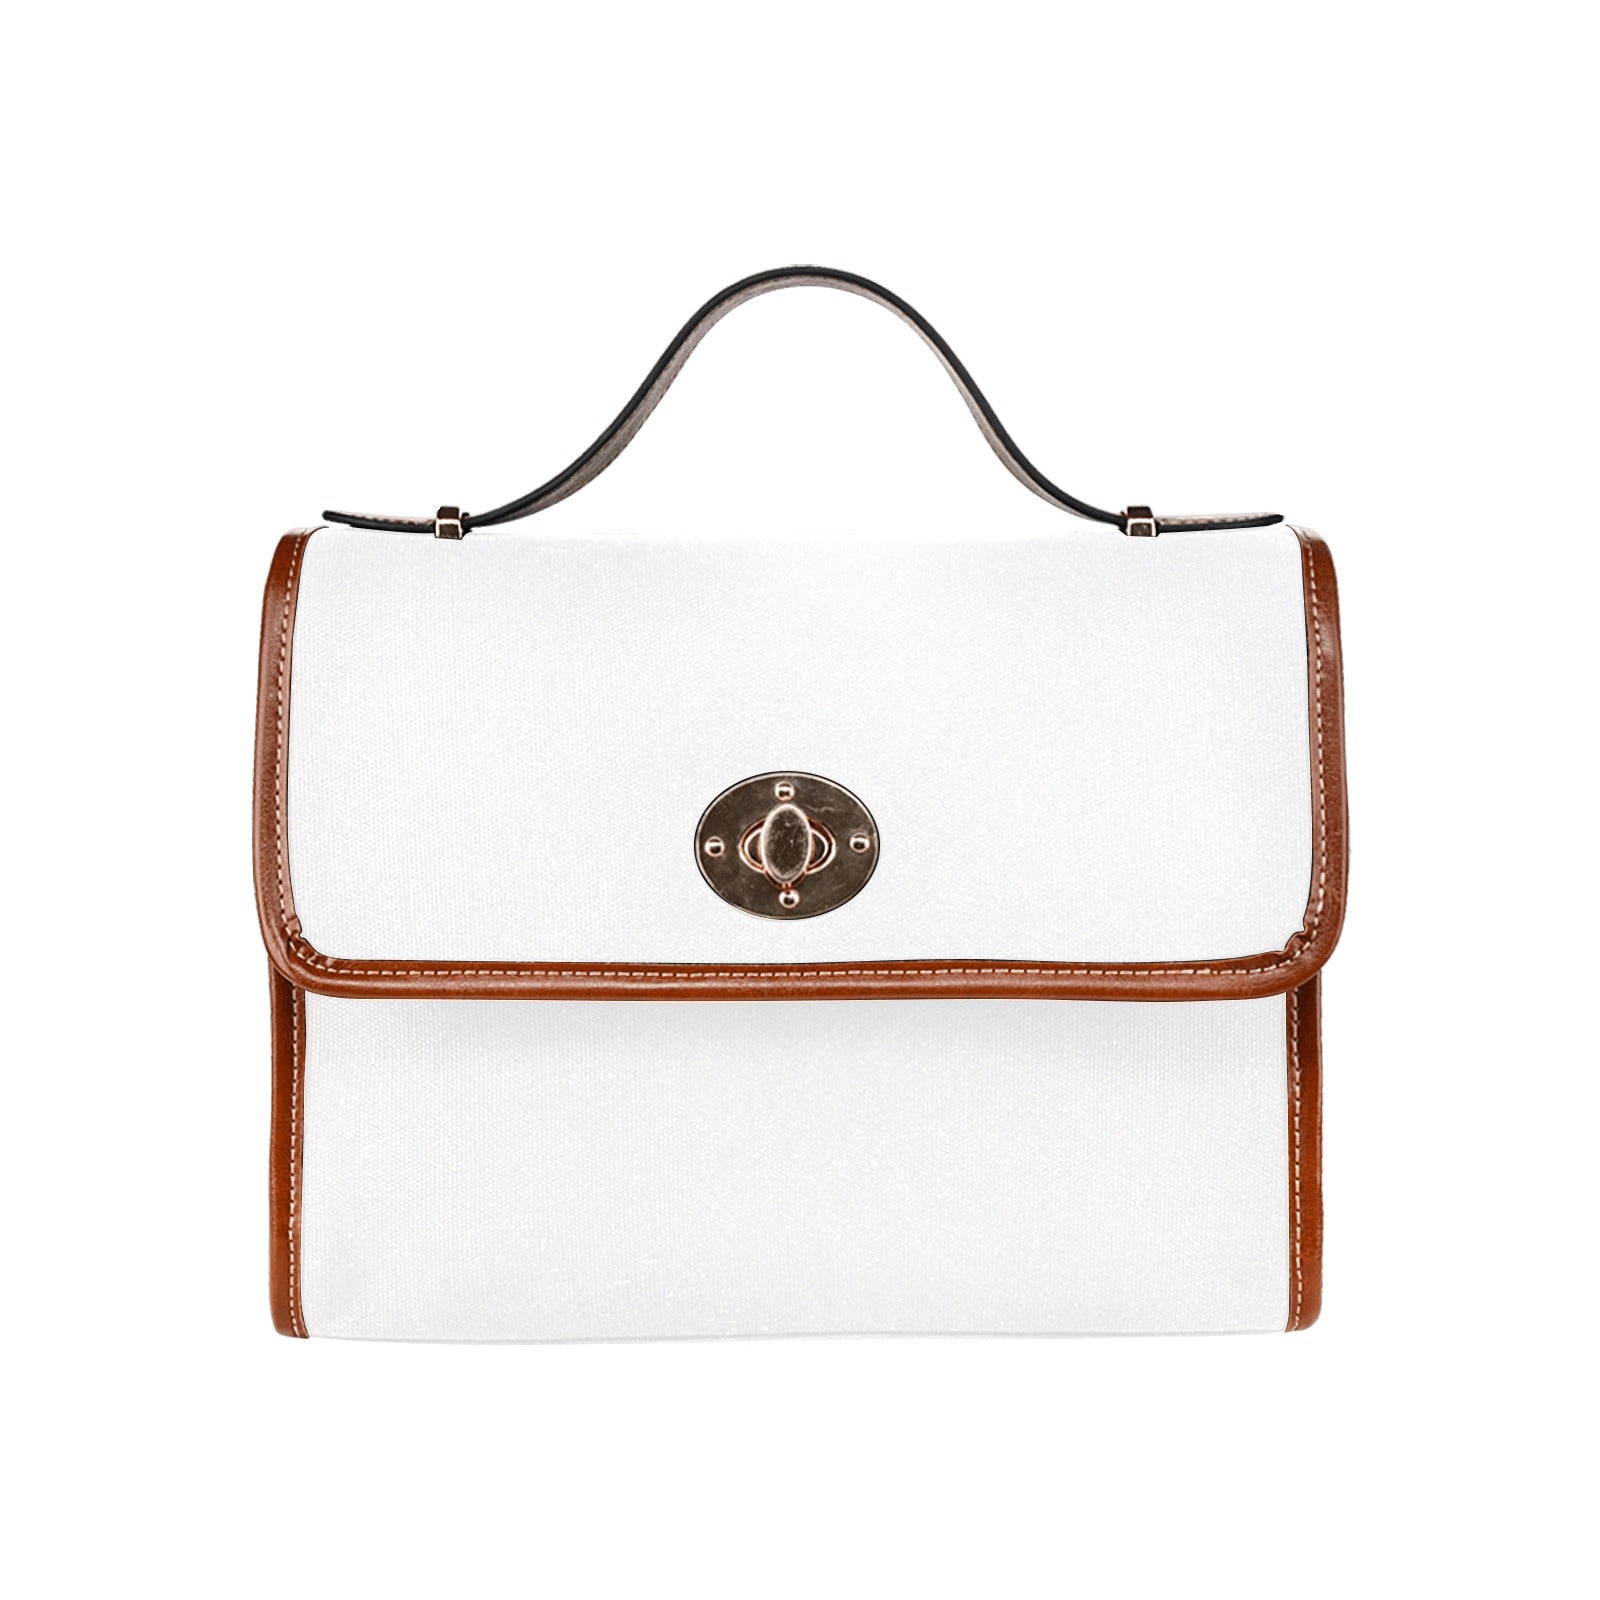 fz zone handbag one size / the zone - white all over print waterproof canvas bag(model1641)(brown strap)